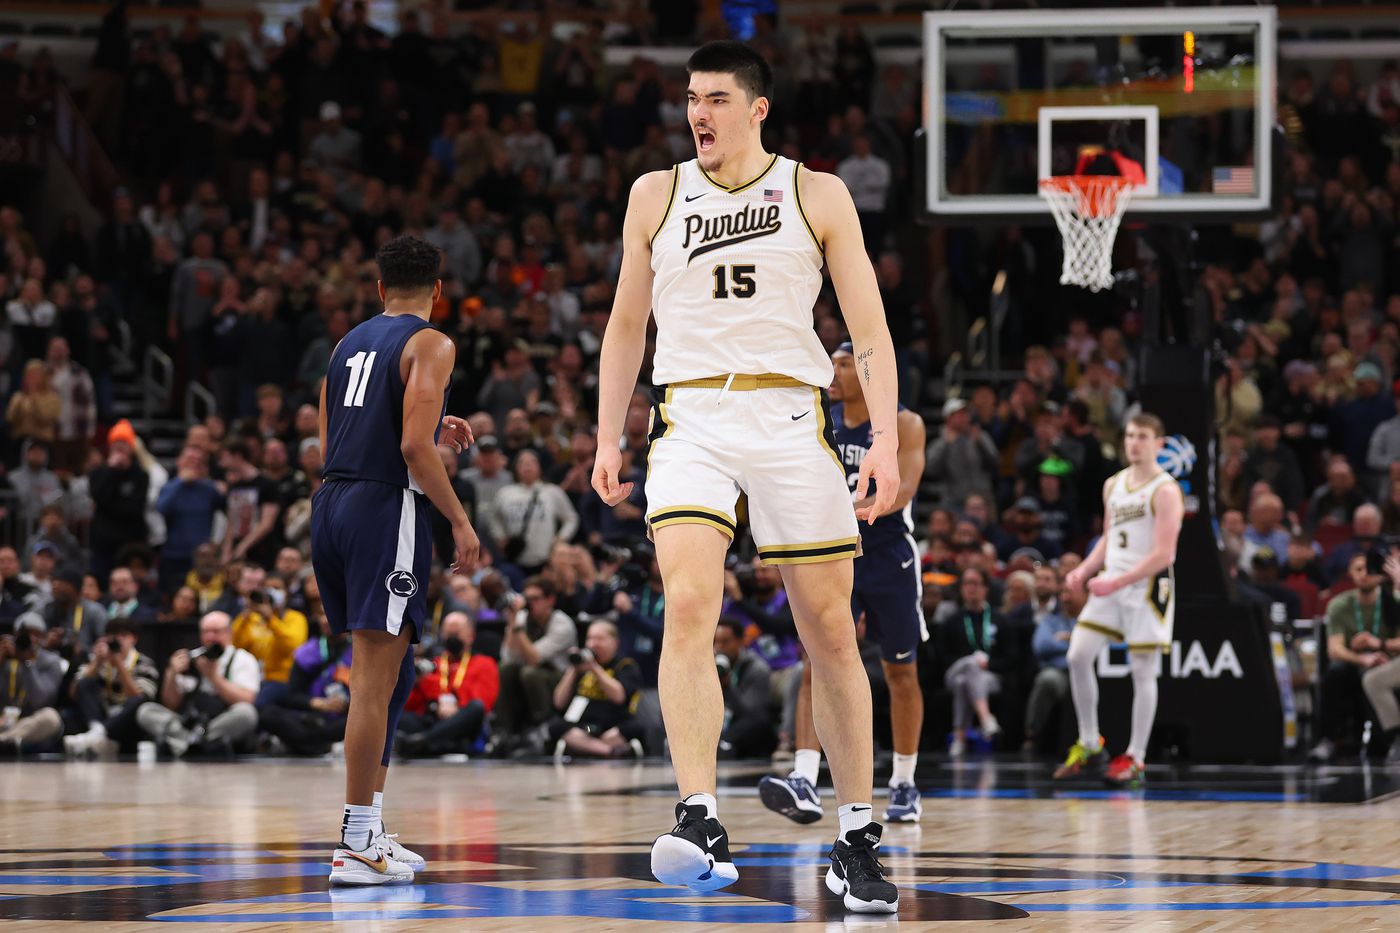 Zach Edey's NBA Draft Surge, How Purdue's Star Impressed Scouts and Boosted His Stock?